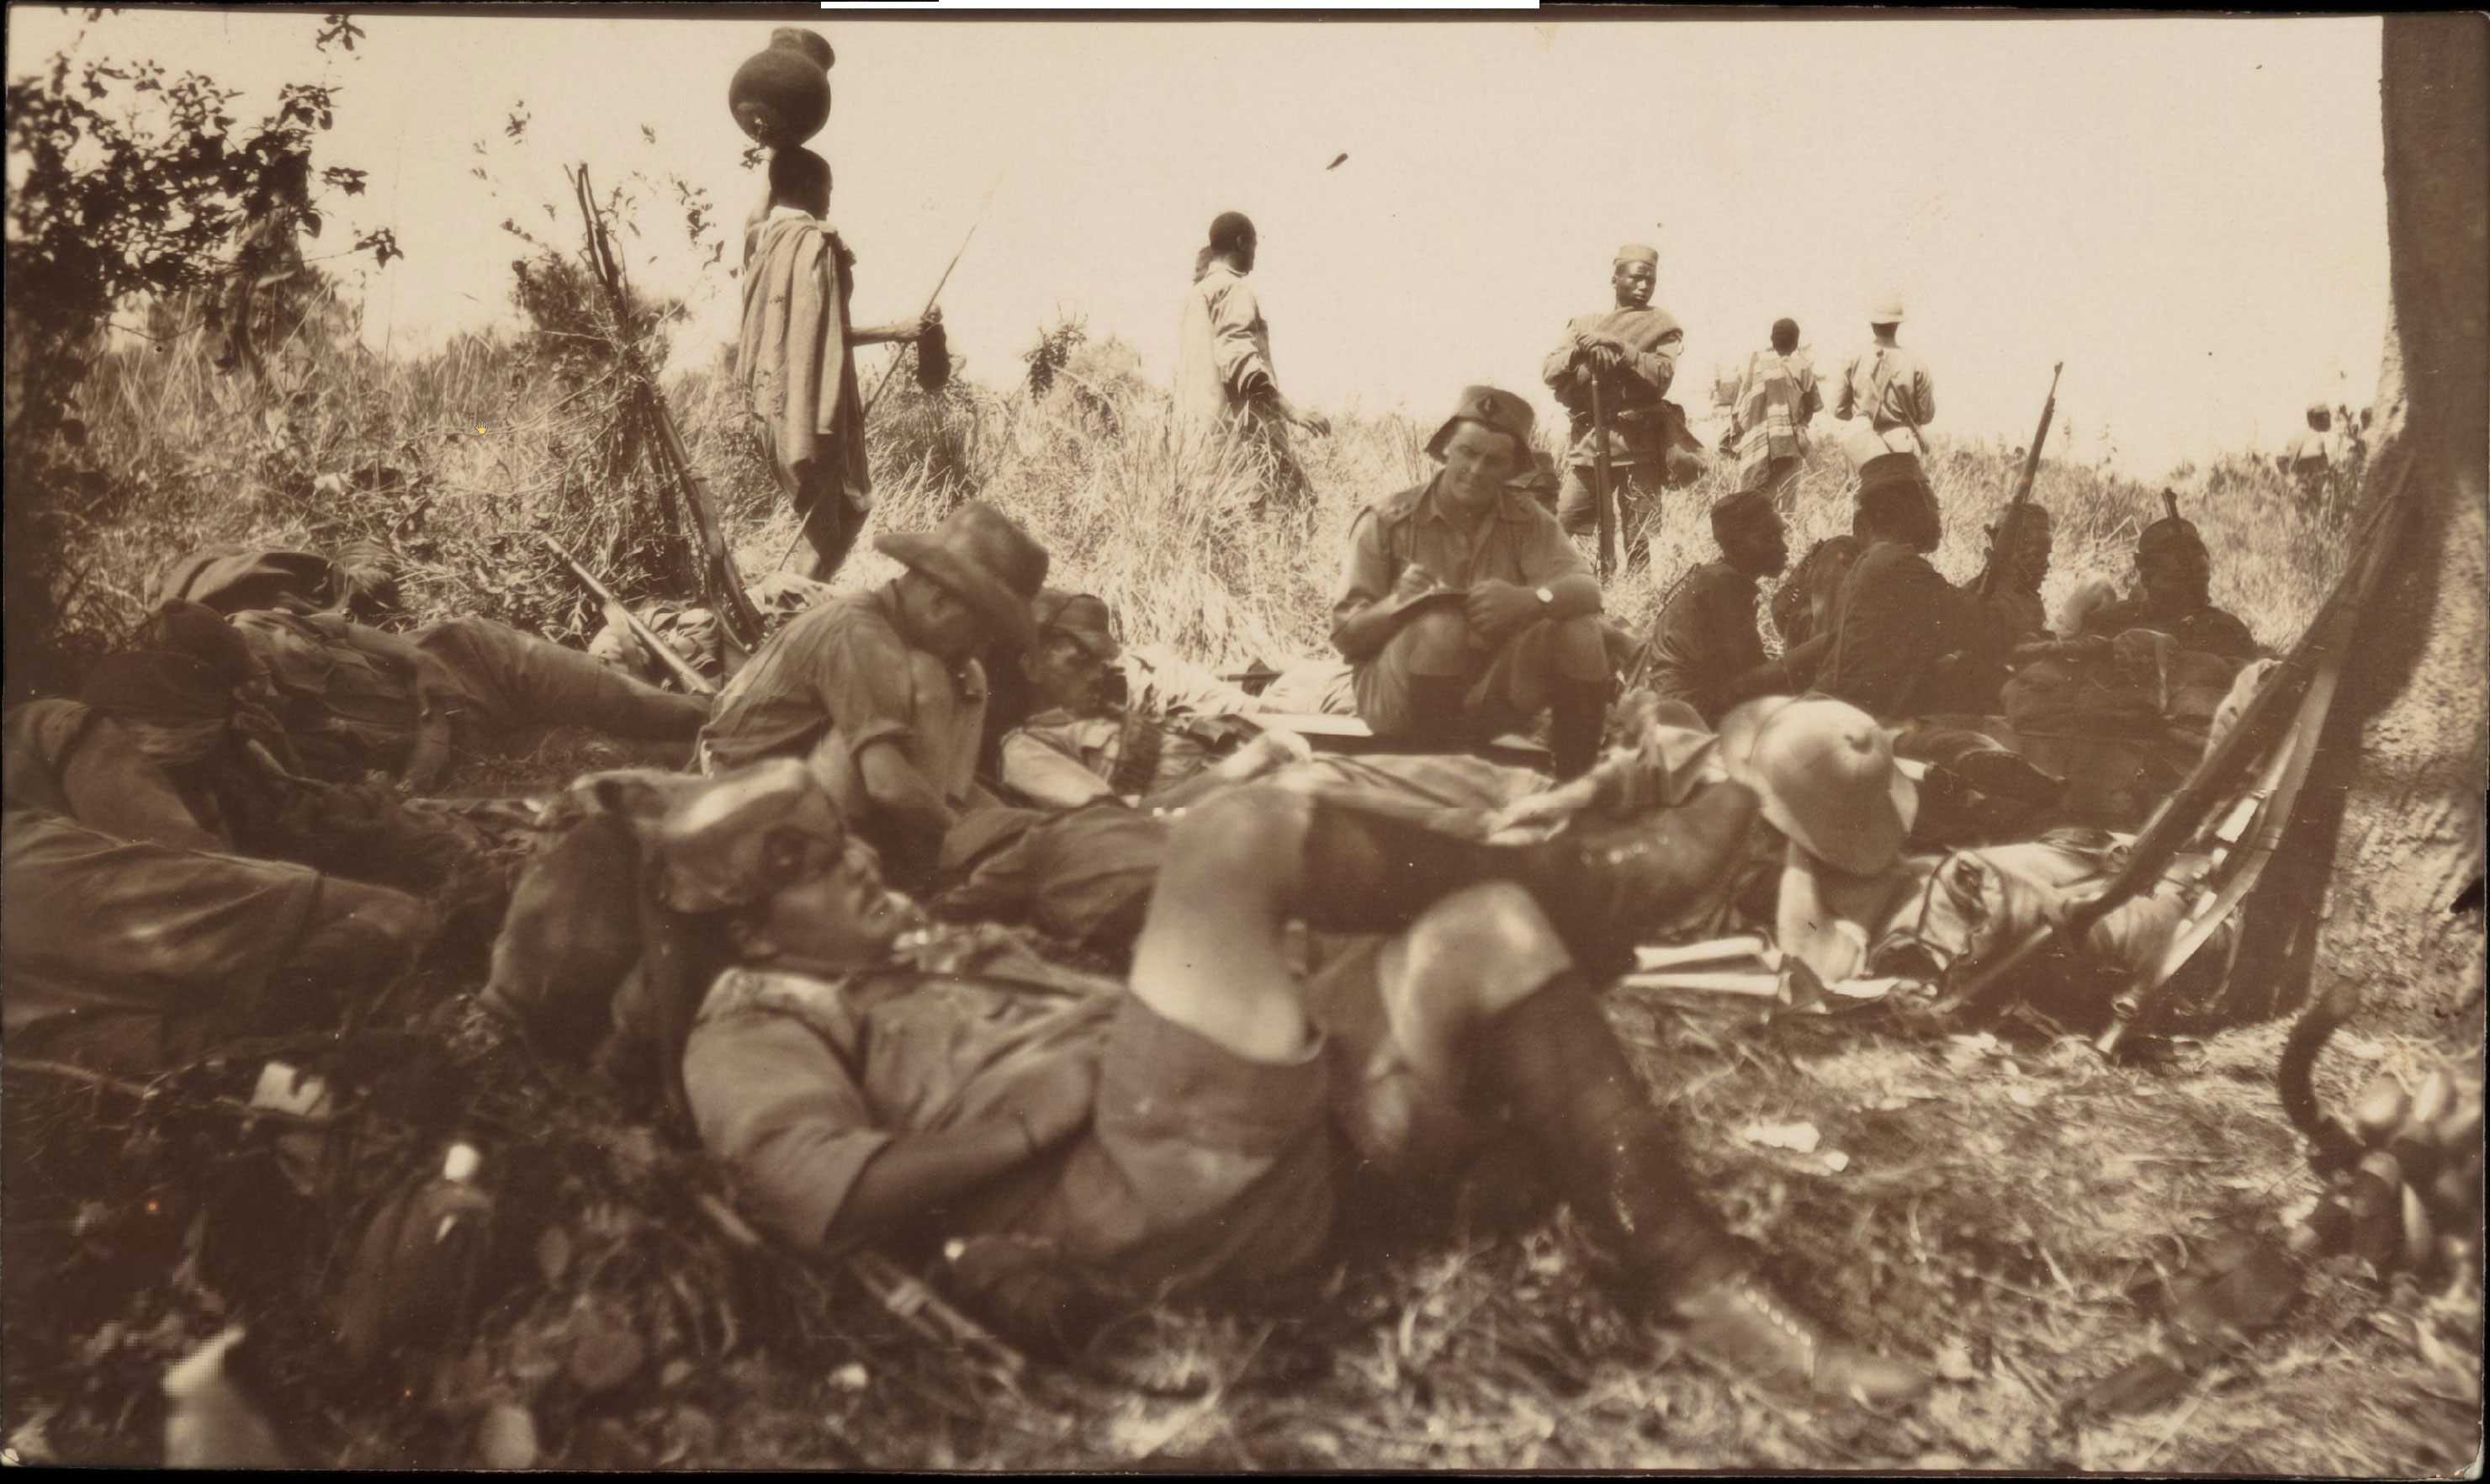 Soldiers resting in northern Africa were the WWI took place.